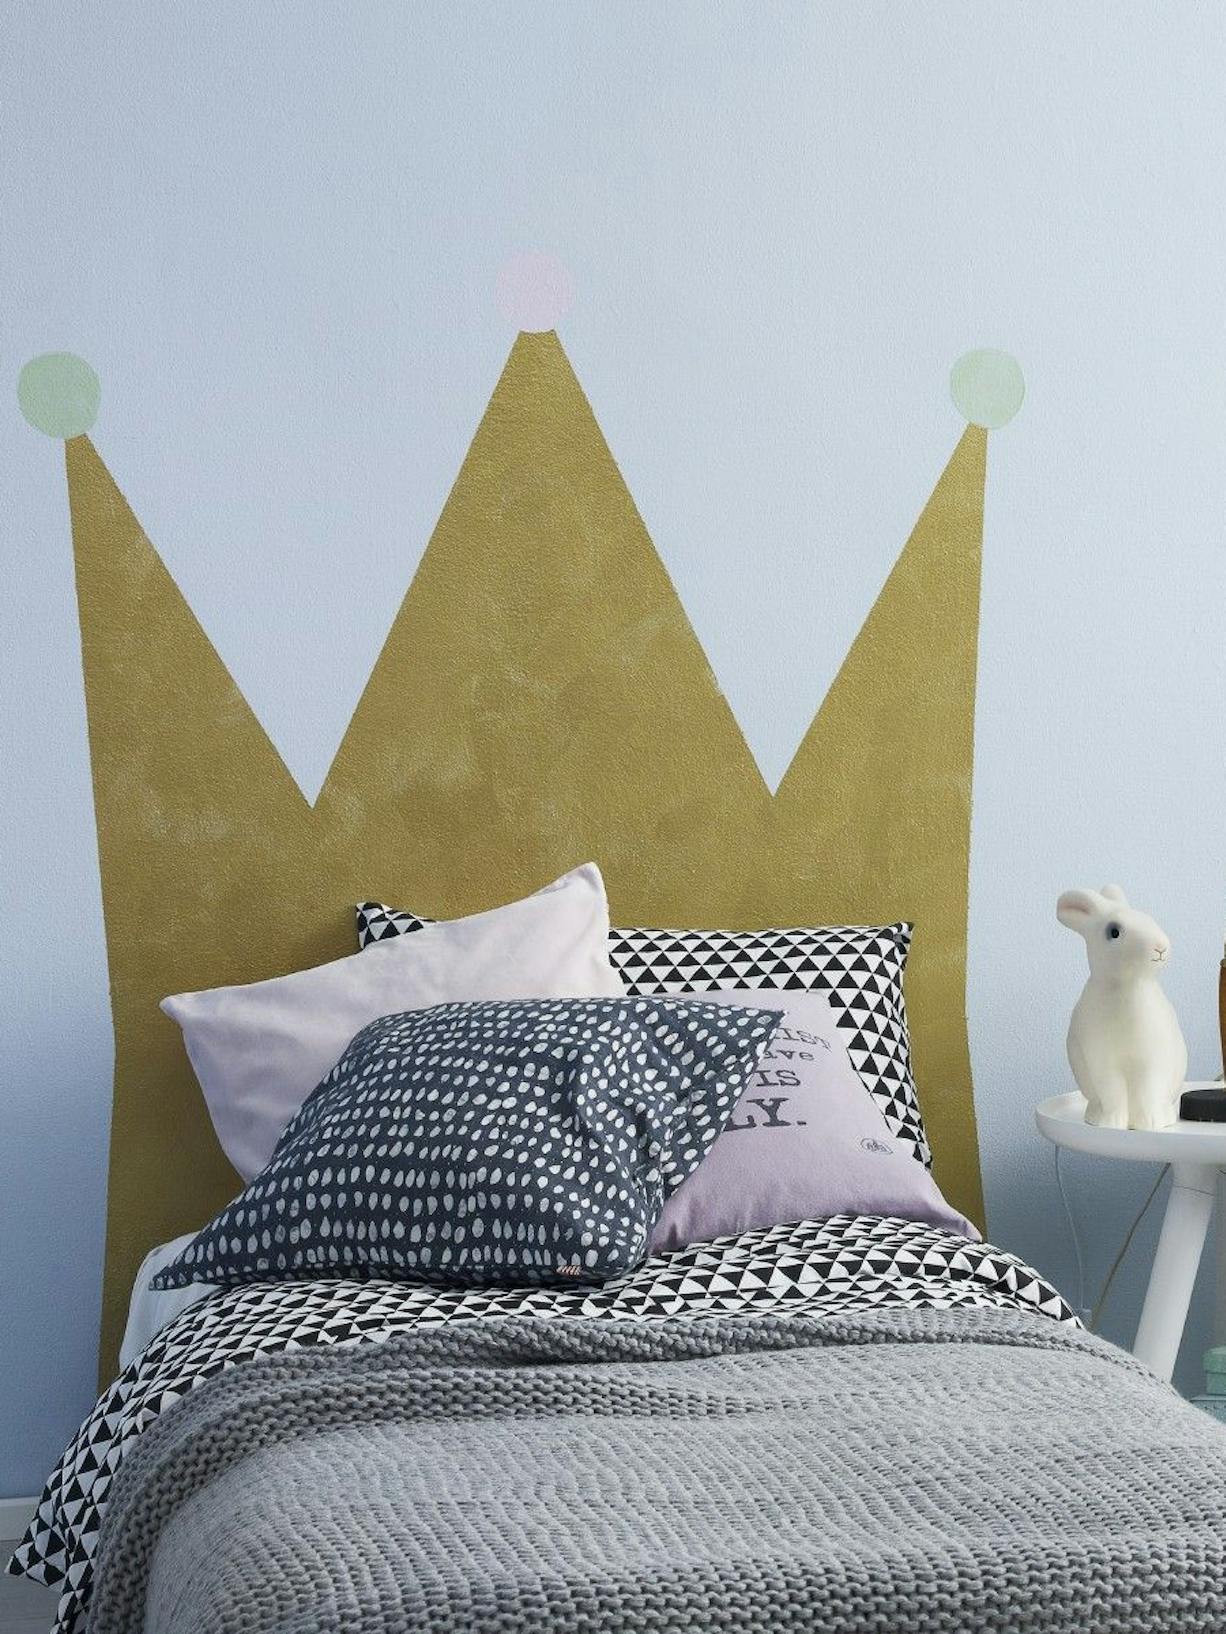 gold painted crown decoration above kid's bed